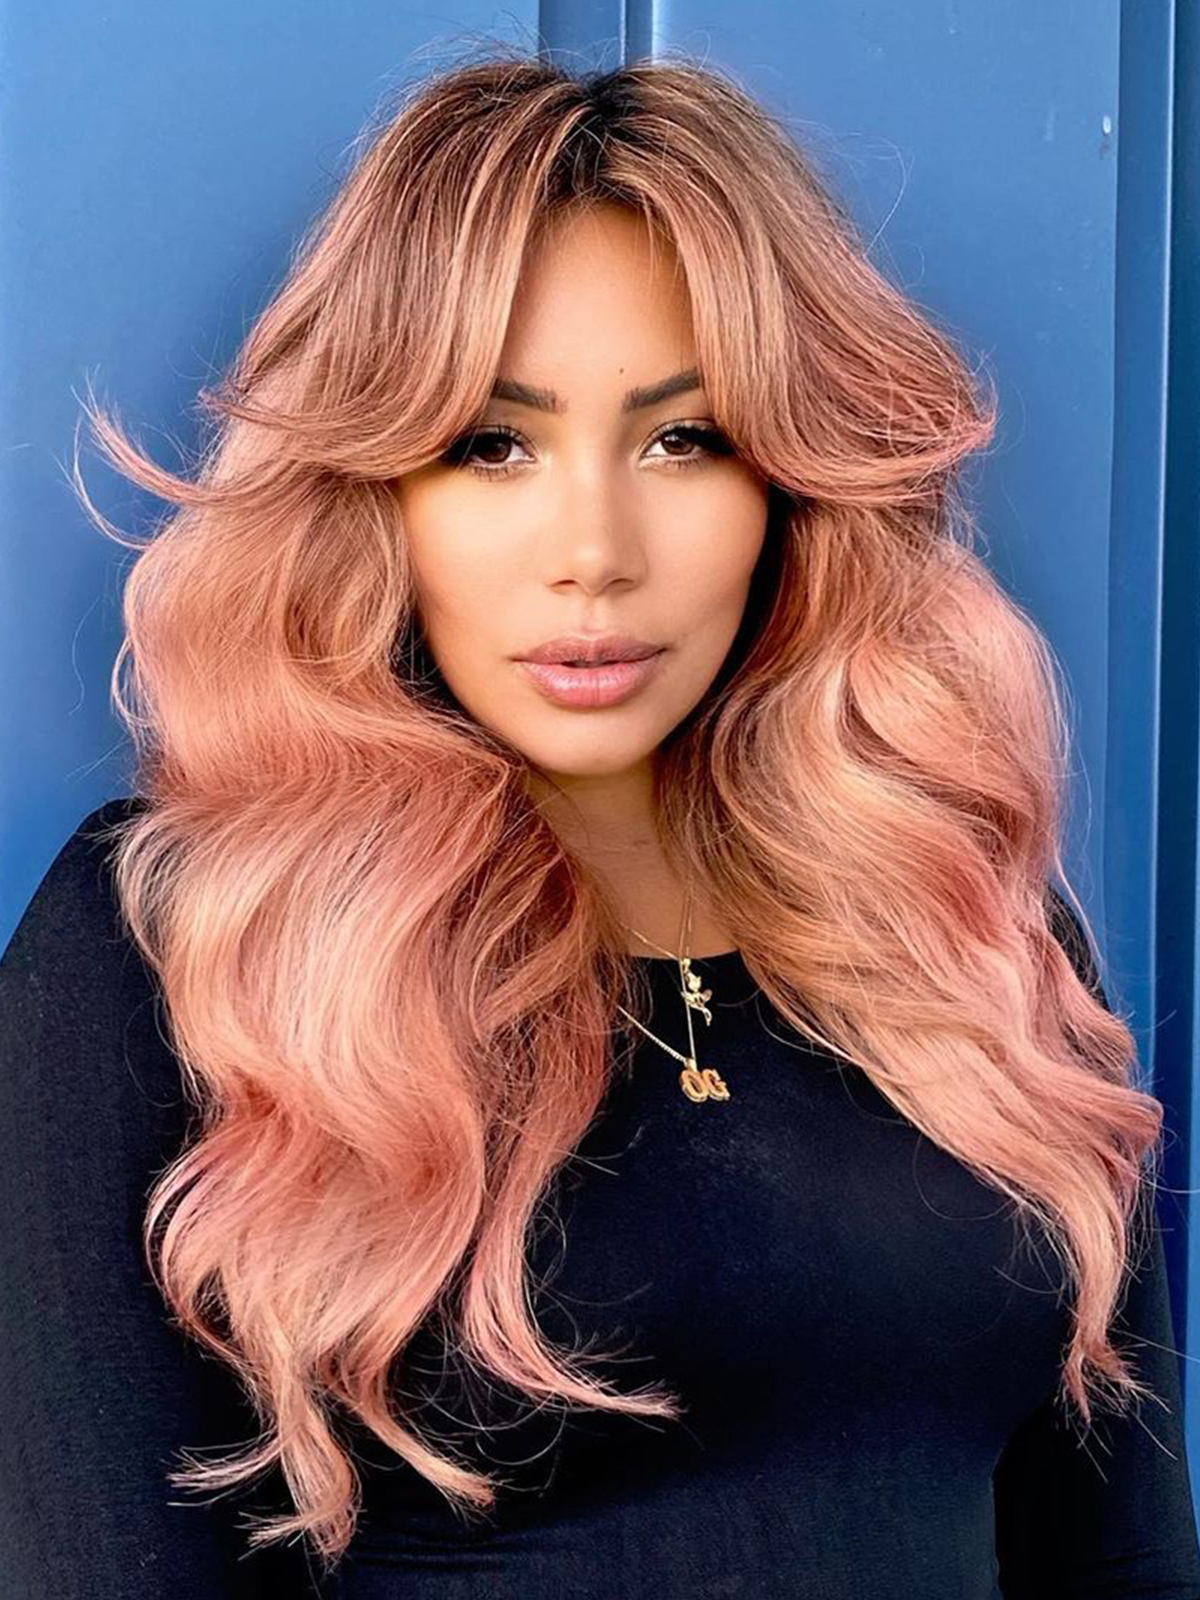 Hairstylist Cynthia Alvarez Shares All of Her Best Hair Tips | Who What Wear